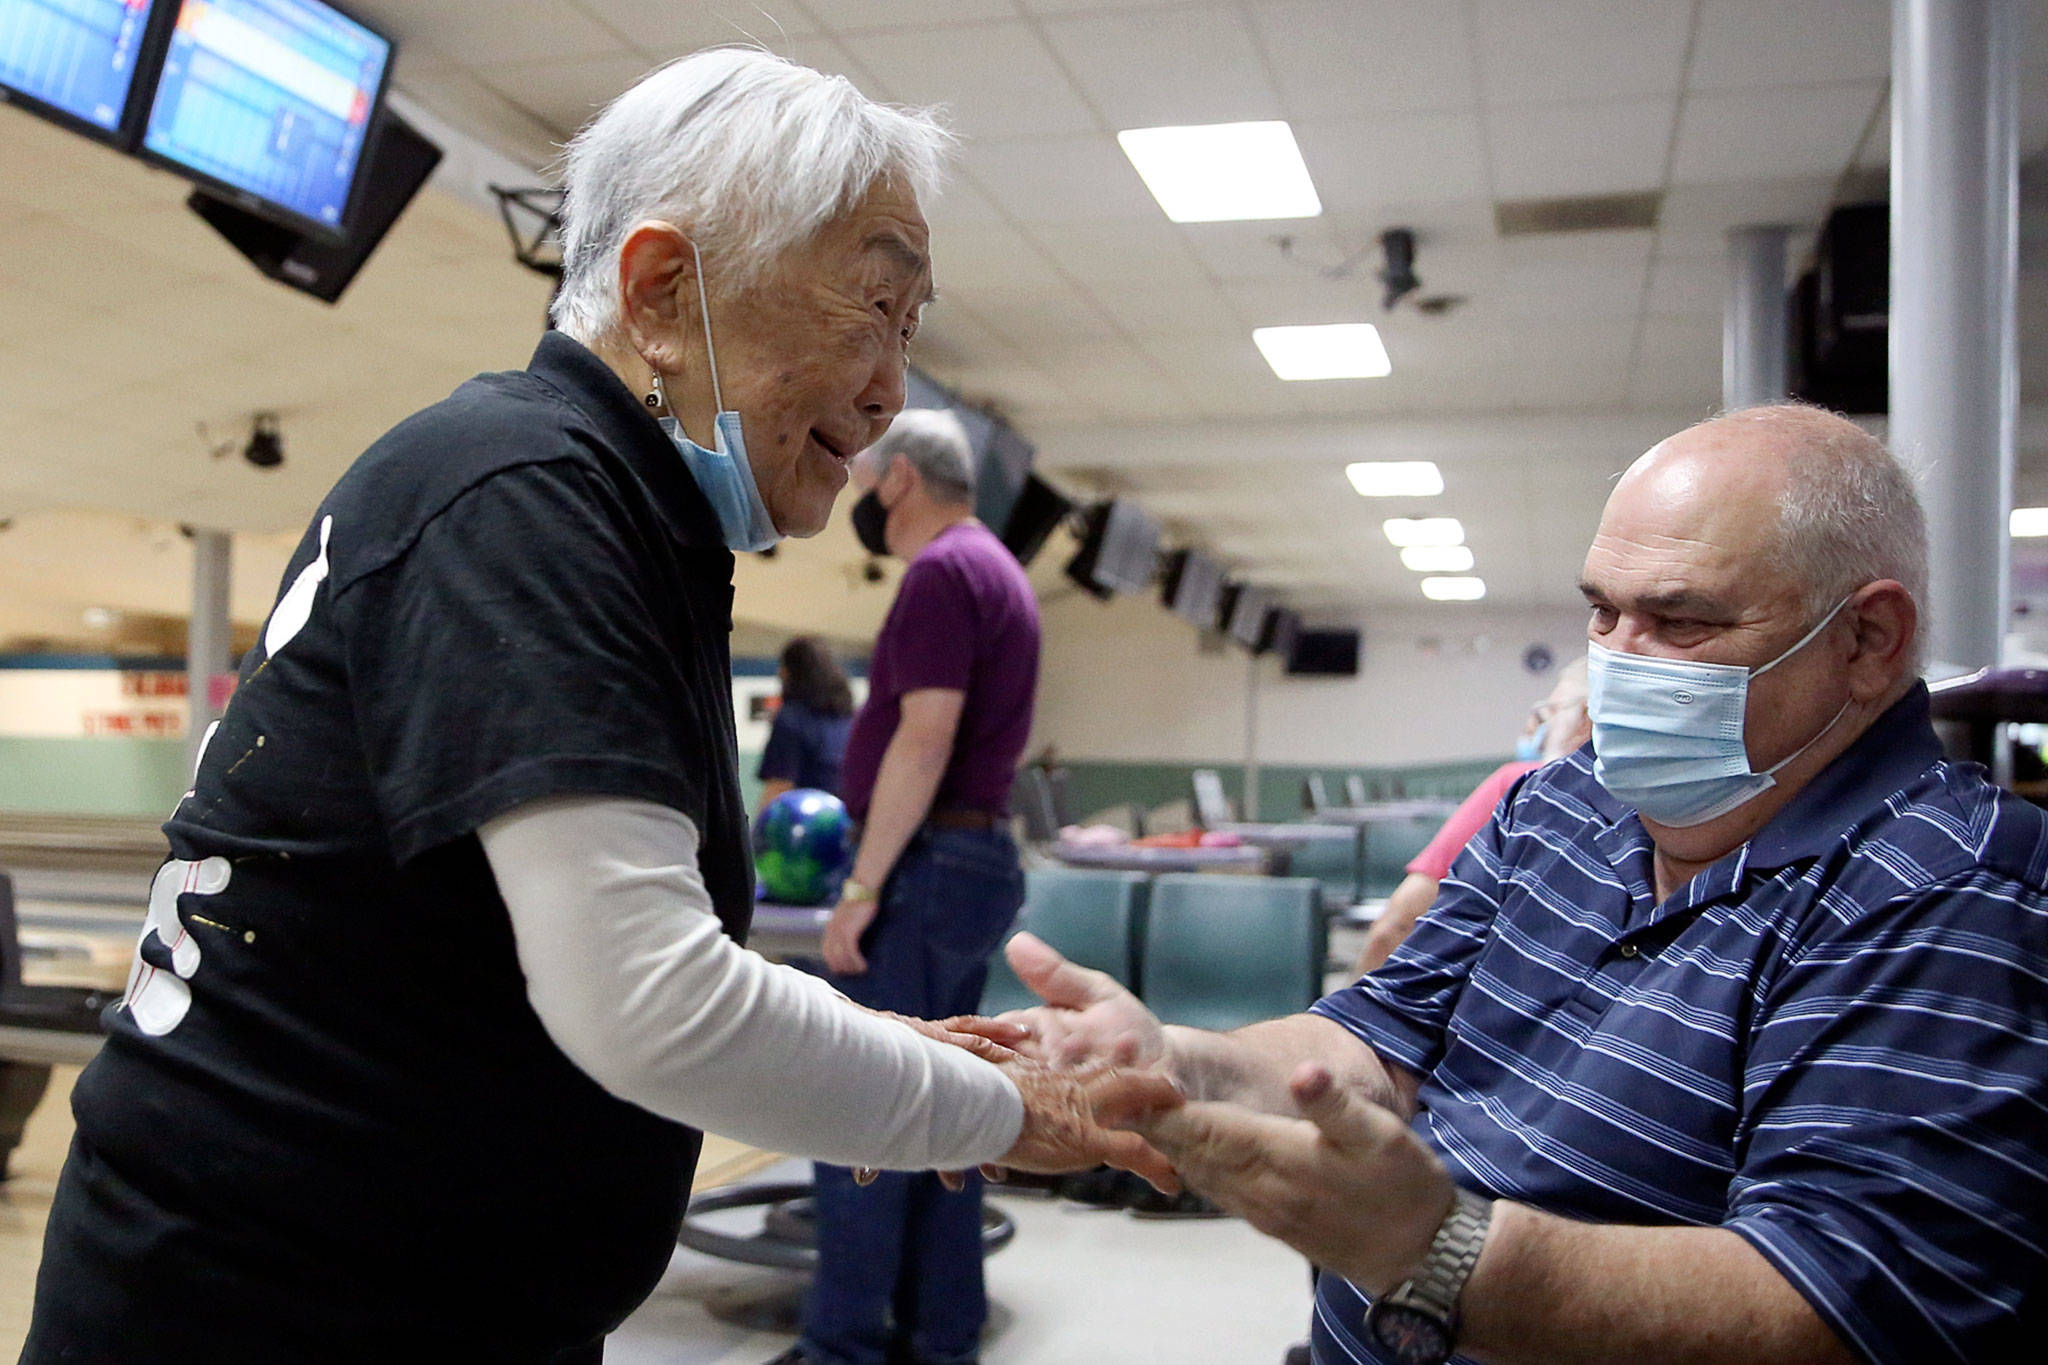 Mae Tomita (left) celebrates with Richard Steele after picking up a spare in the first frame Wednesday afternoon at Strawberry Lanes in Marysville. (Kevin Clark / The Herald)